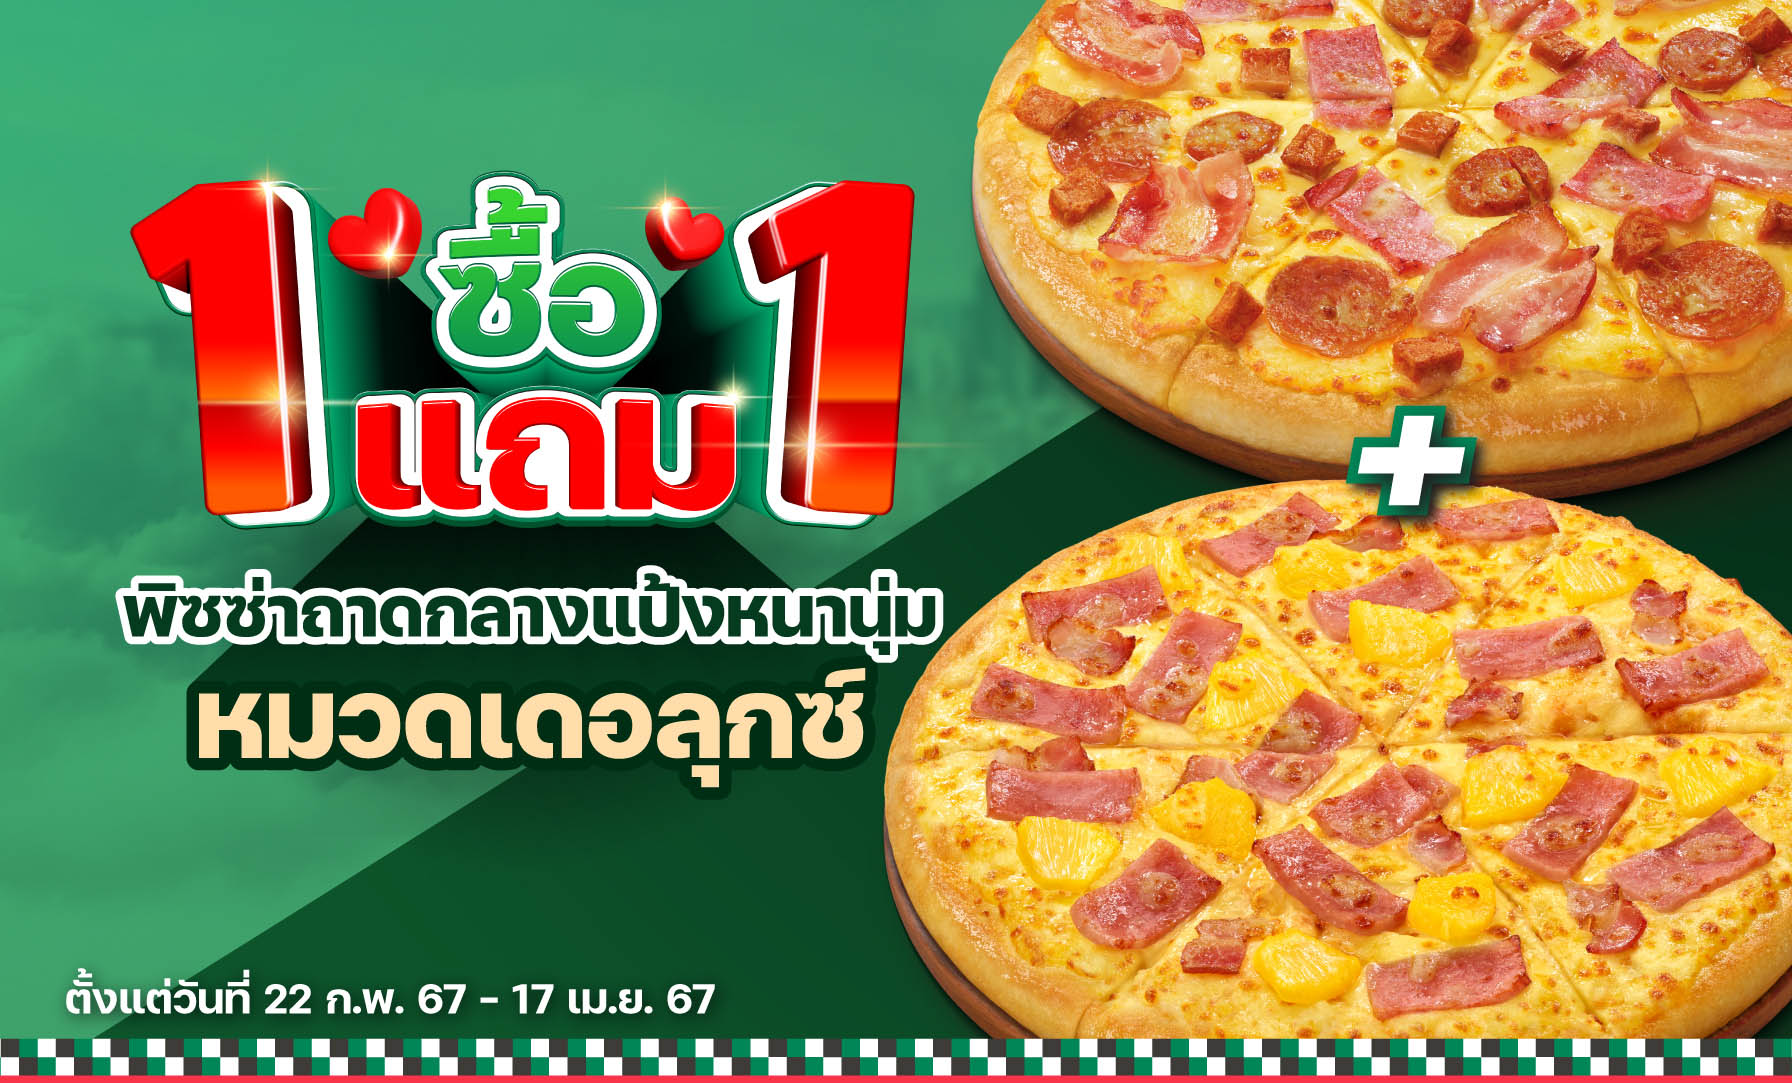 Buy 1 Get 1 Free Pan Pizza with Deluxe Topping